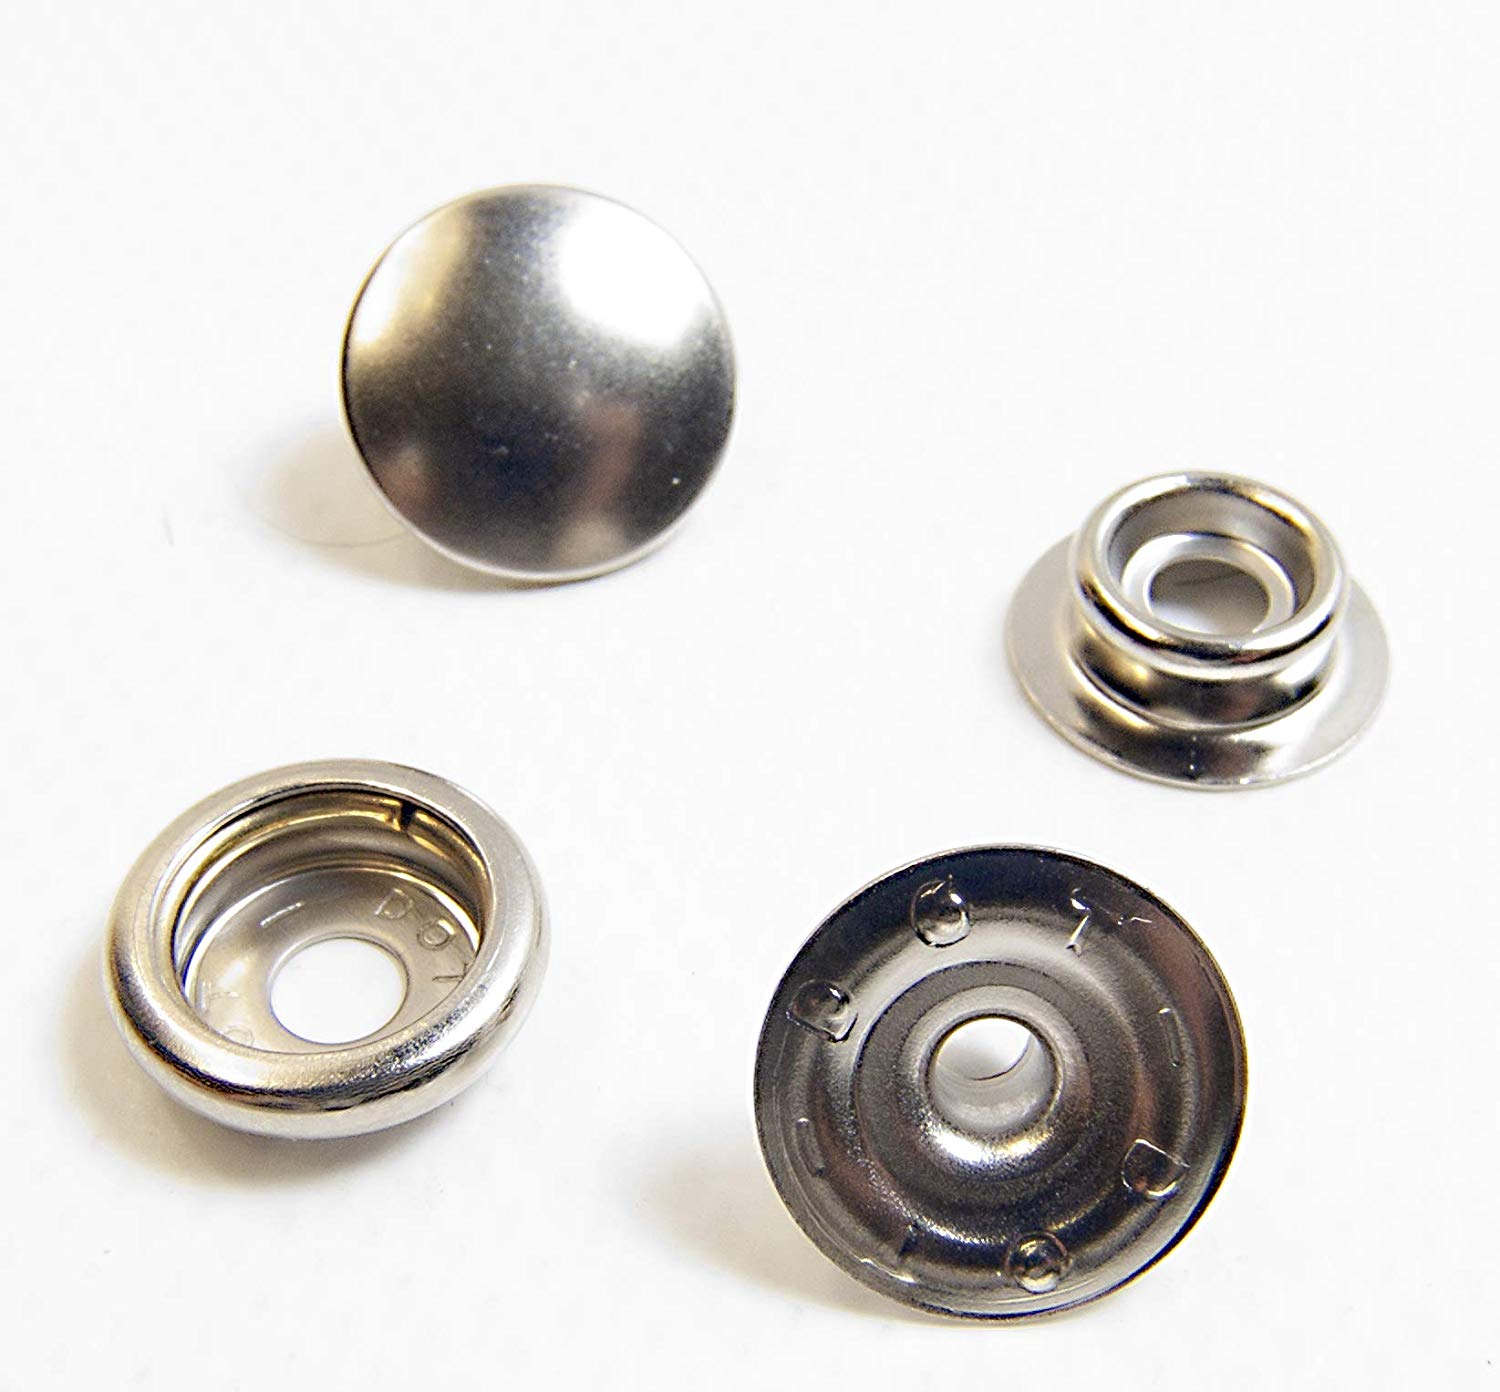 Nickel Plated Brass Snap Fasteners 3/16 Post on Cap & 1/4 Post